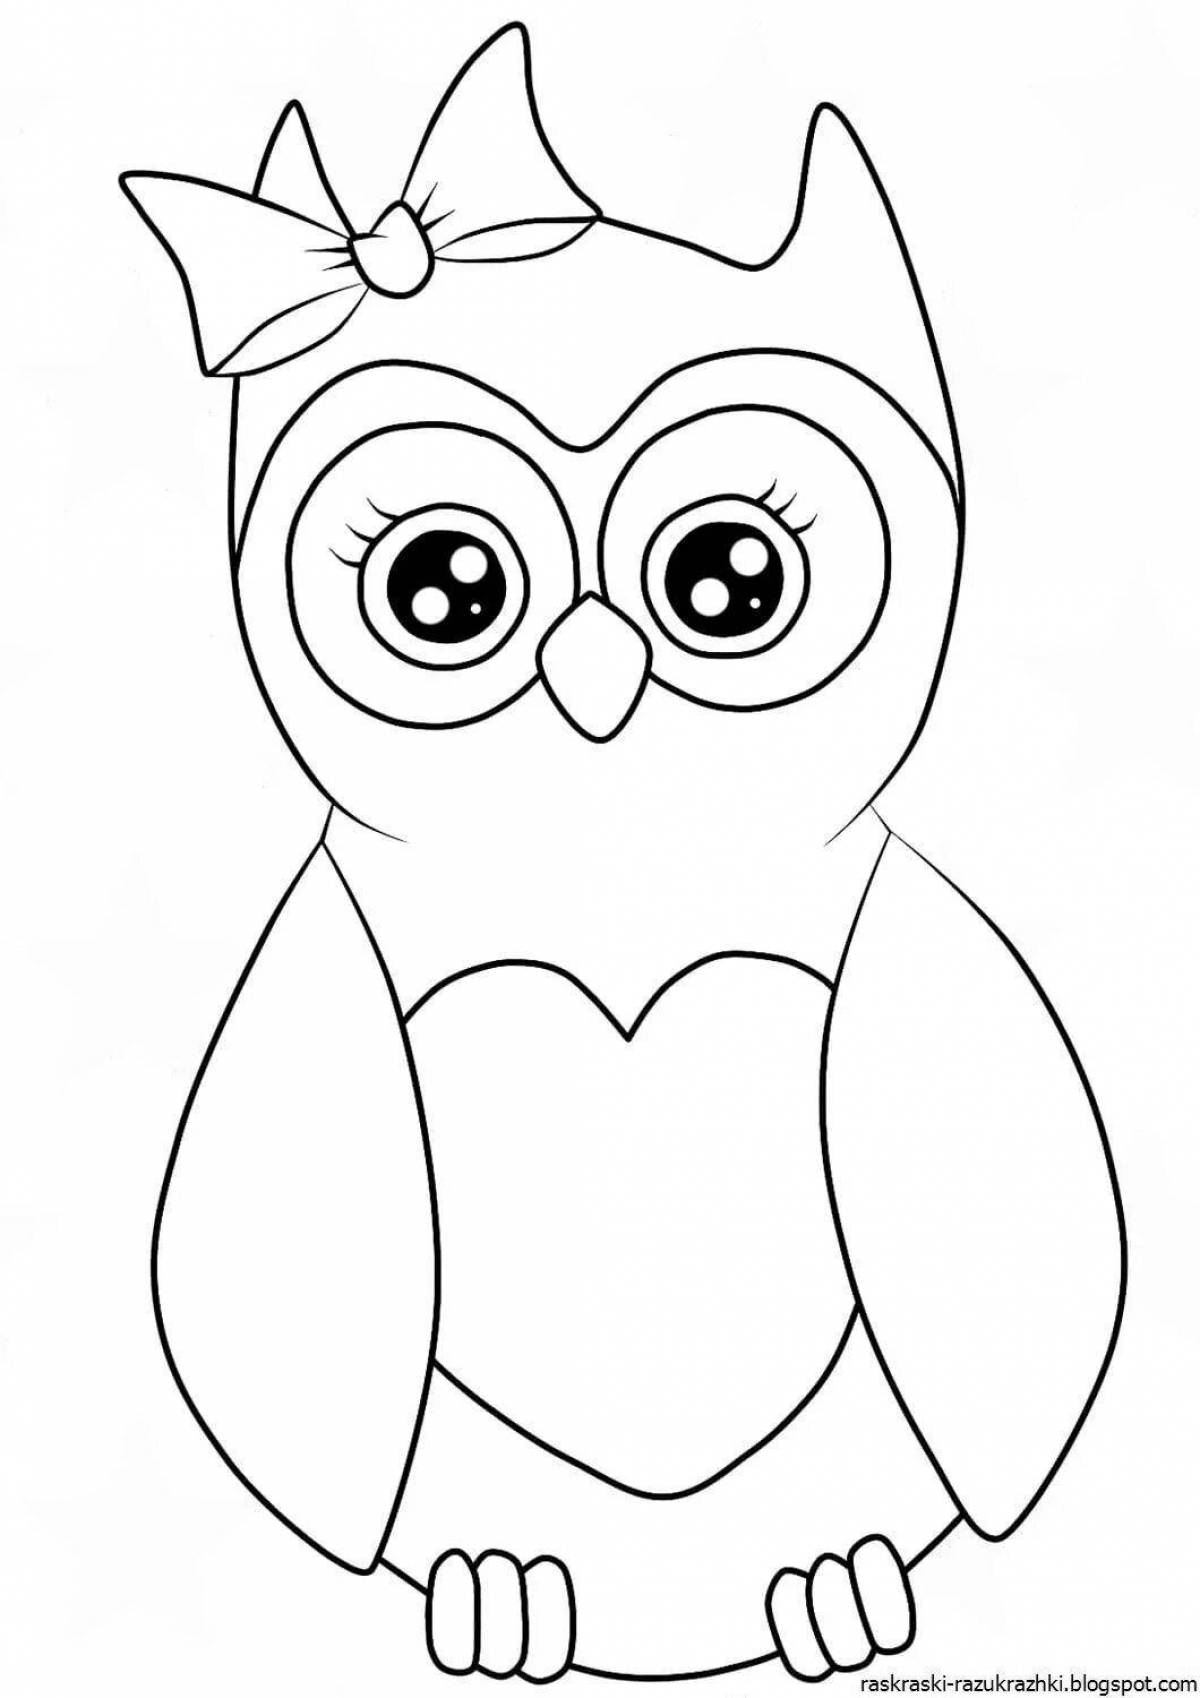 Fancy owl coloring for kids